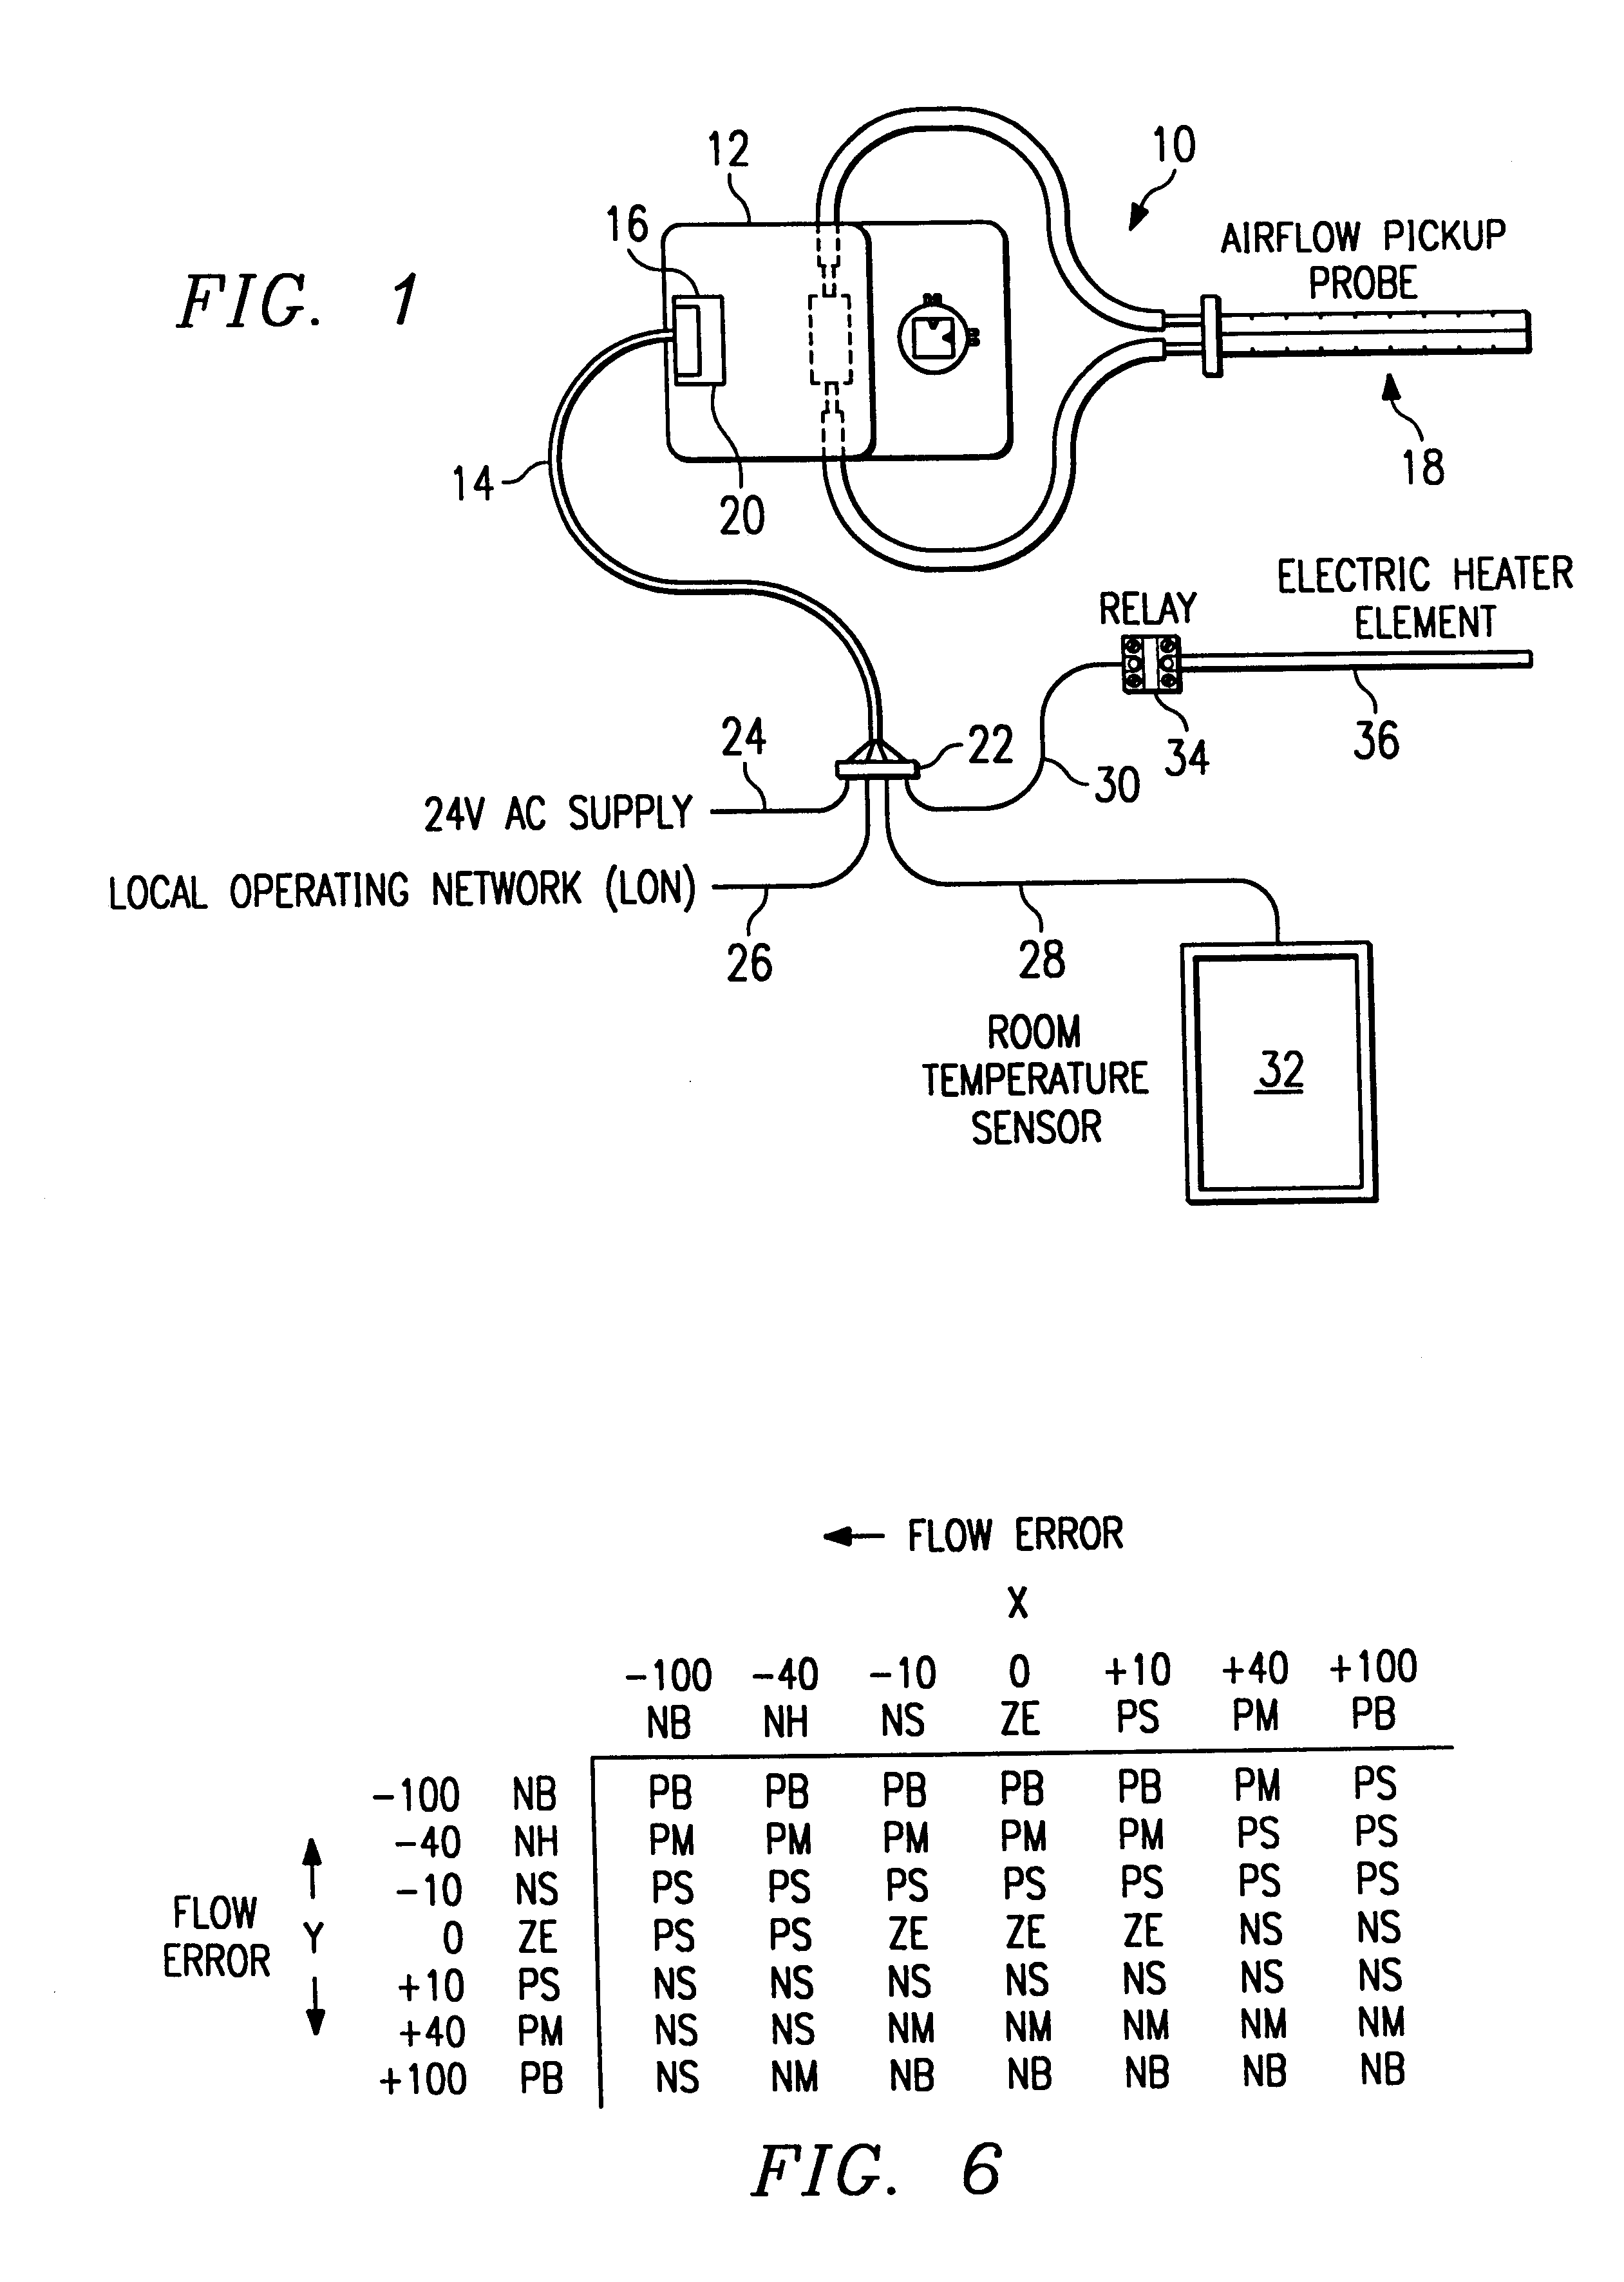 Variable air volume environmental management system including a fuzzy logic control system